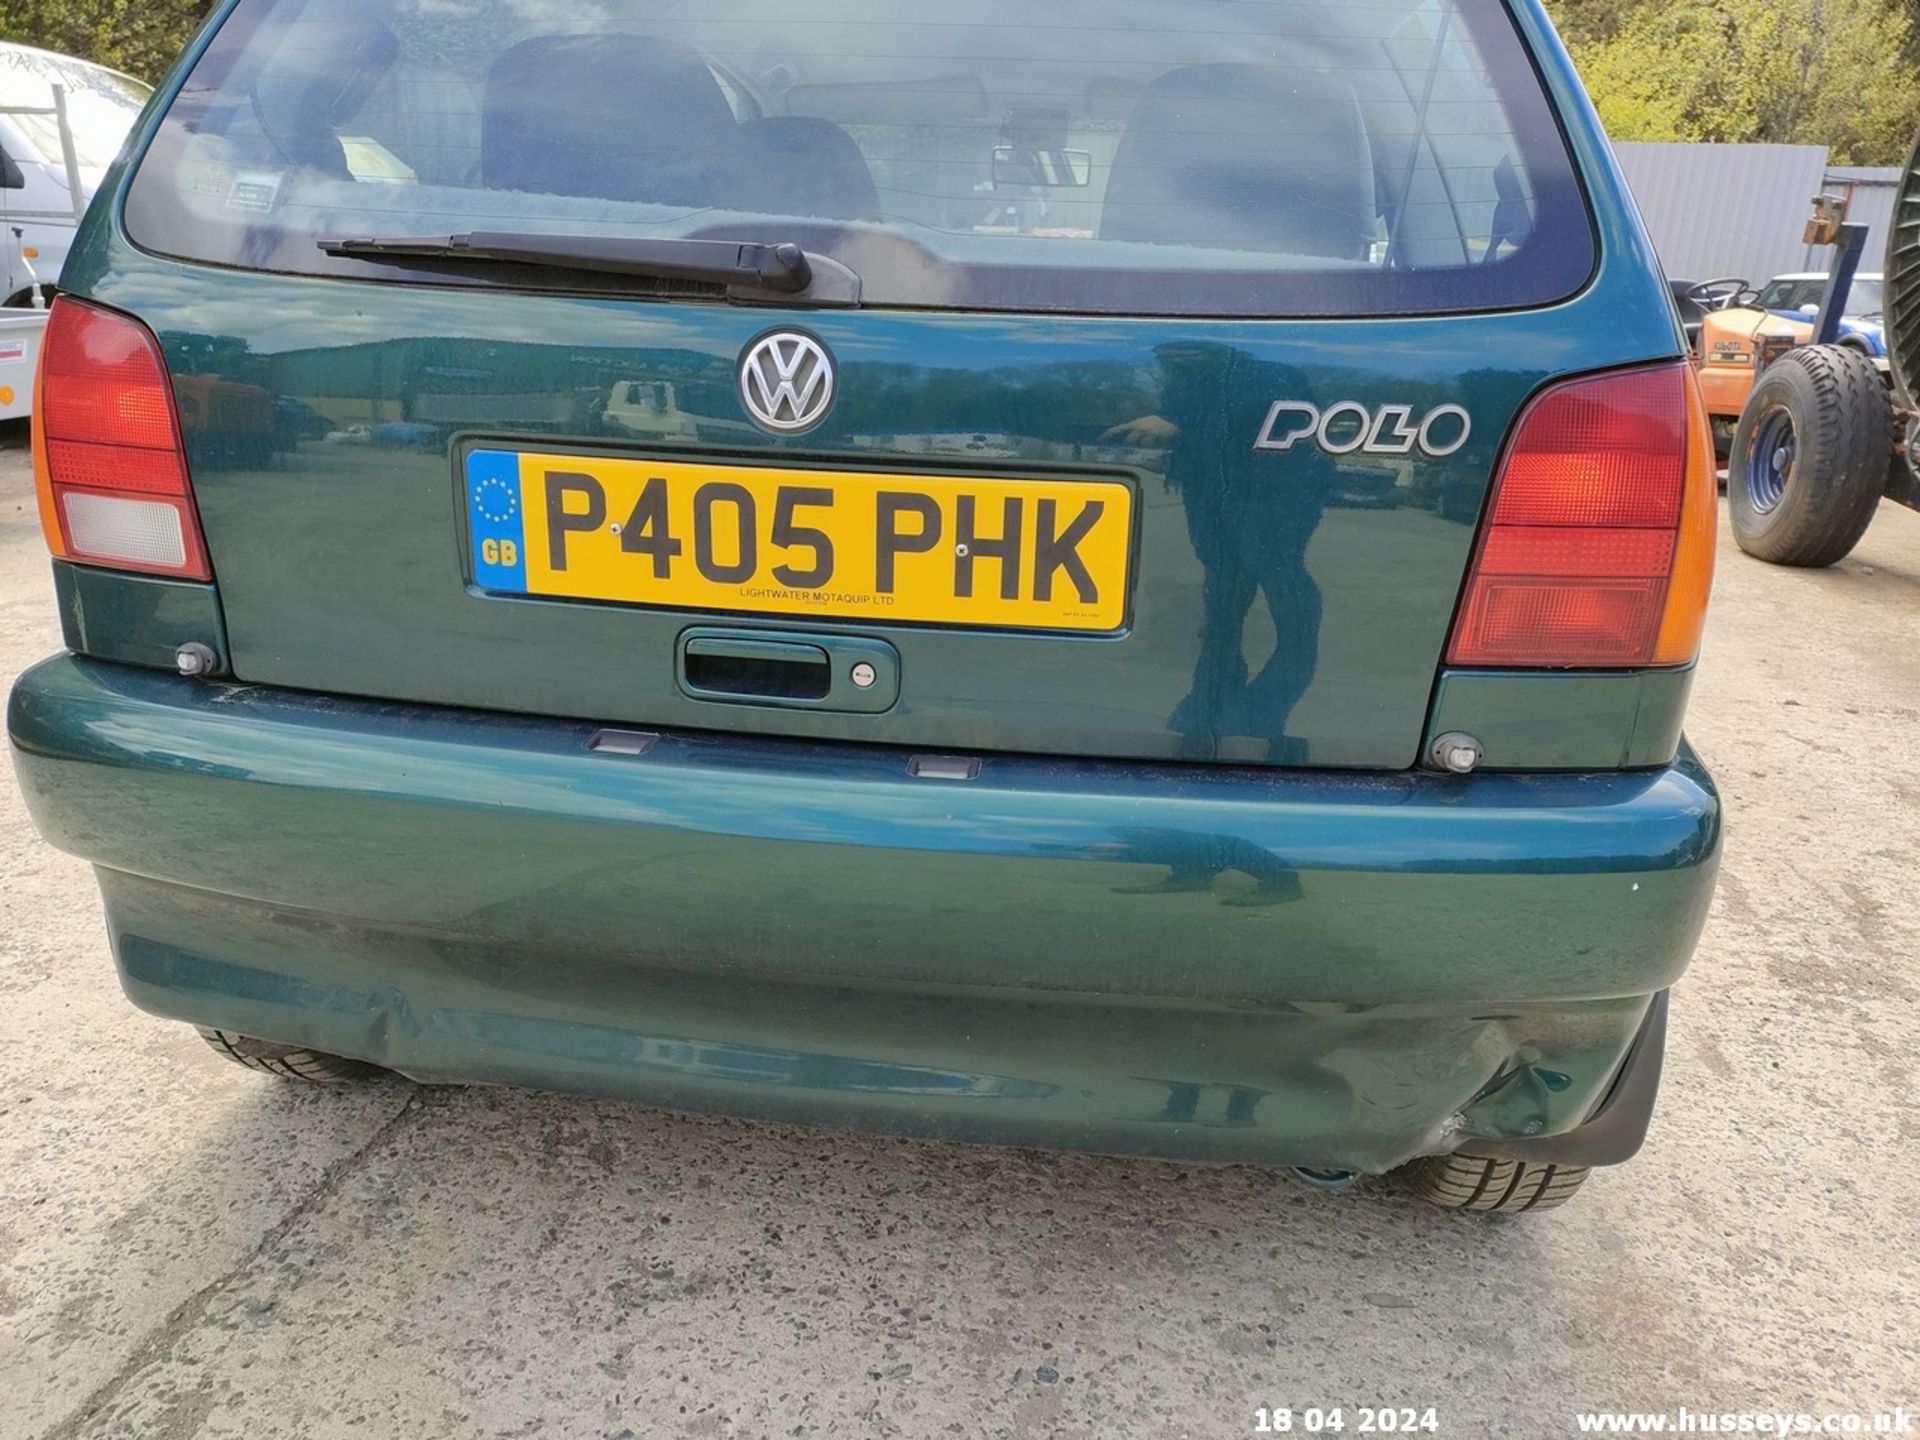 1997 VOLKSWAGEN POLO 1.4 CL AUTO - 1390cc 3dr Hatchback (Green, 68k) - Image 34 of 60